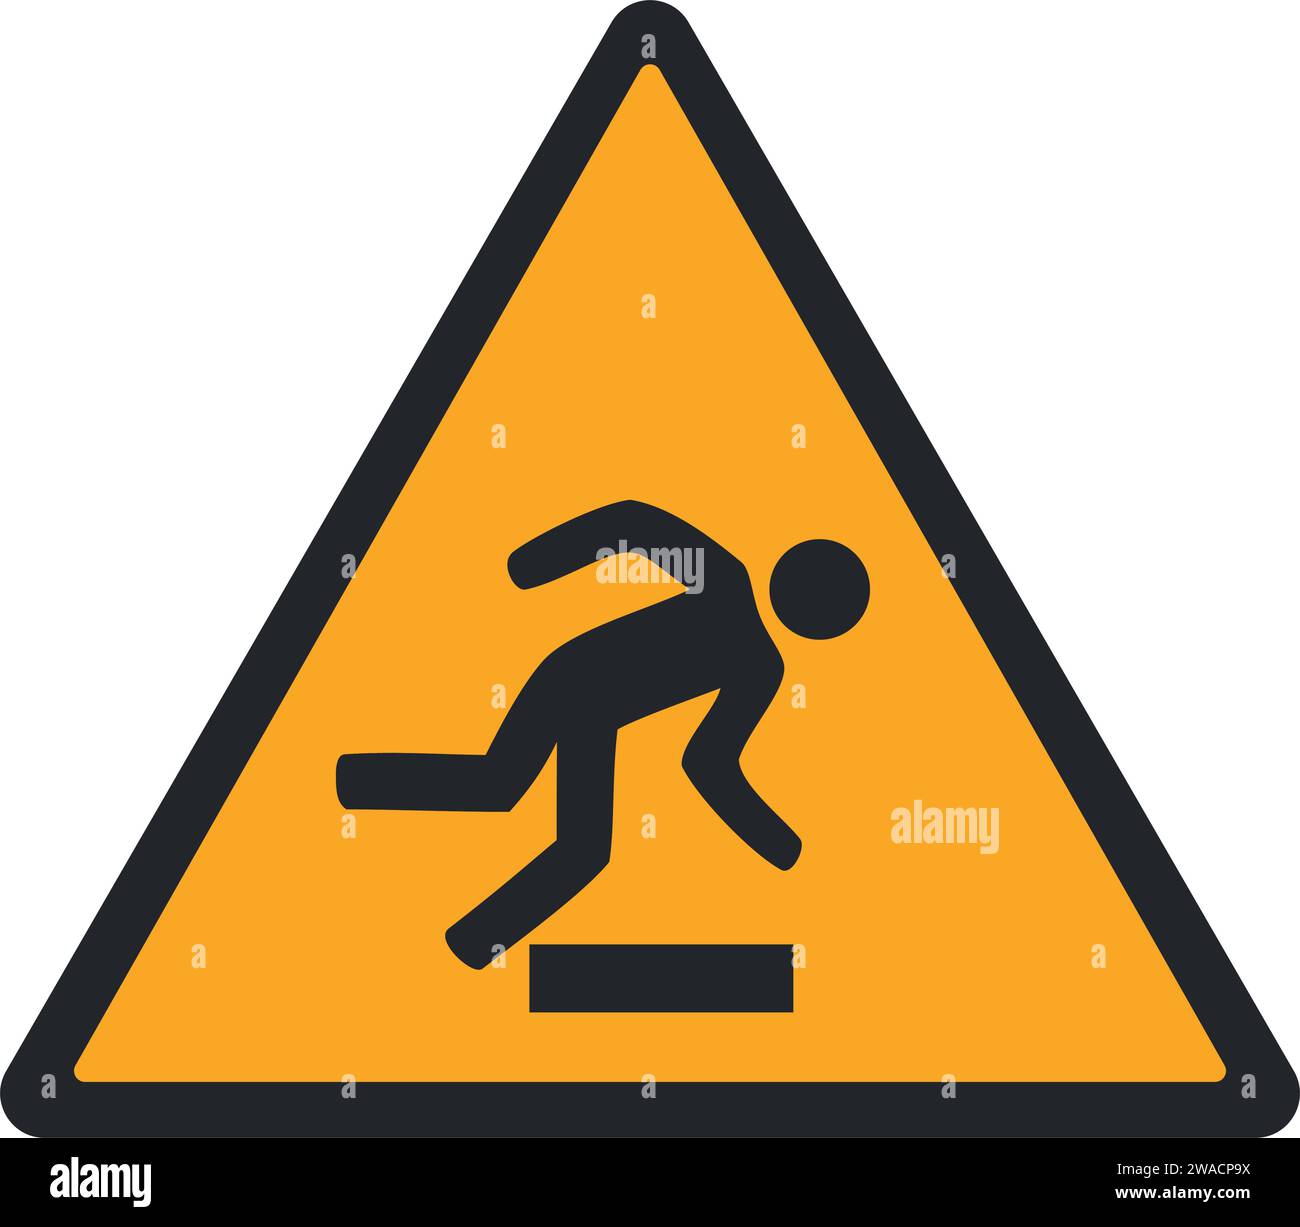 WARNING PICTOGRAM, FLOOR-LEVEL OBSTACLE ISO 7010 - W007 Stock Vector